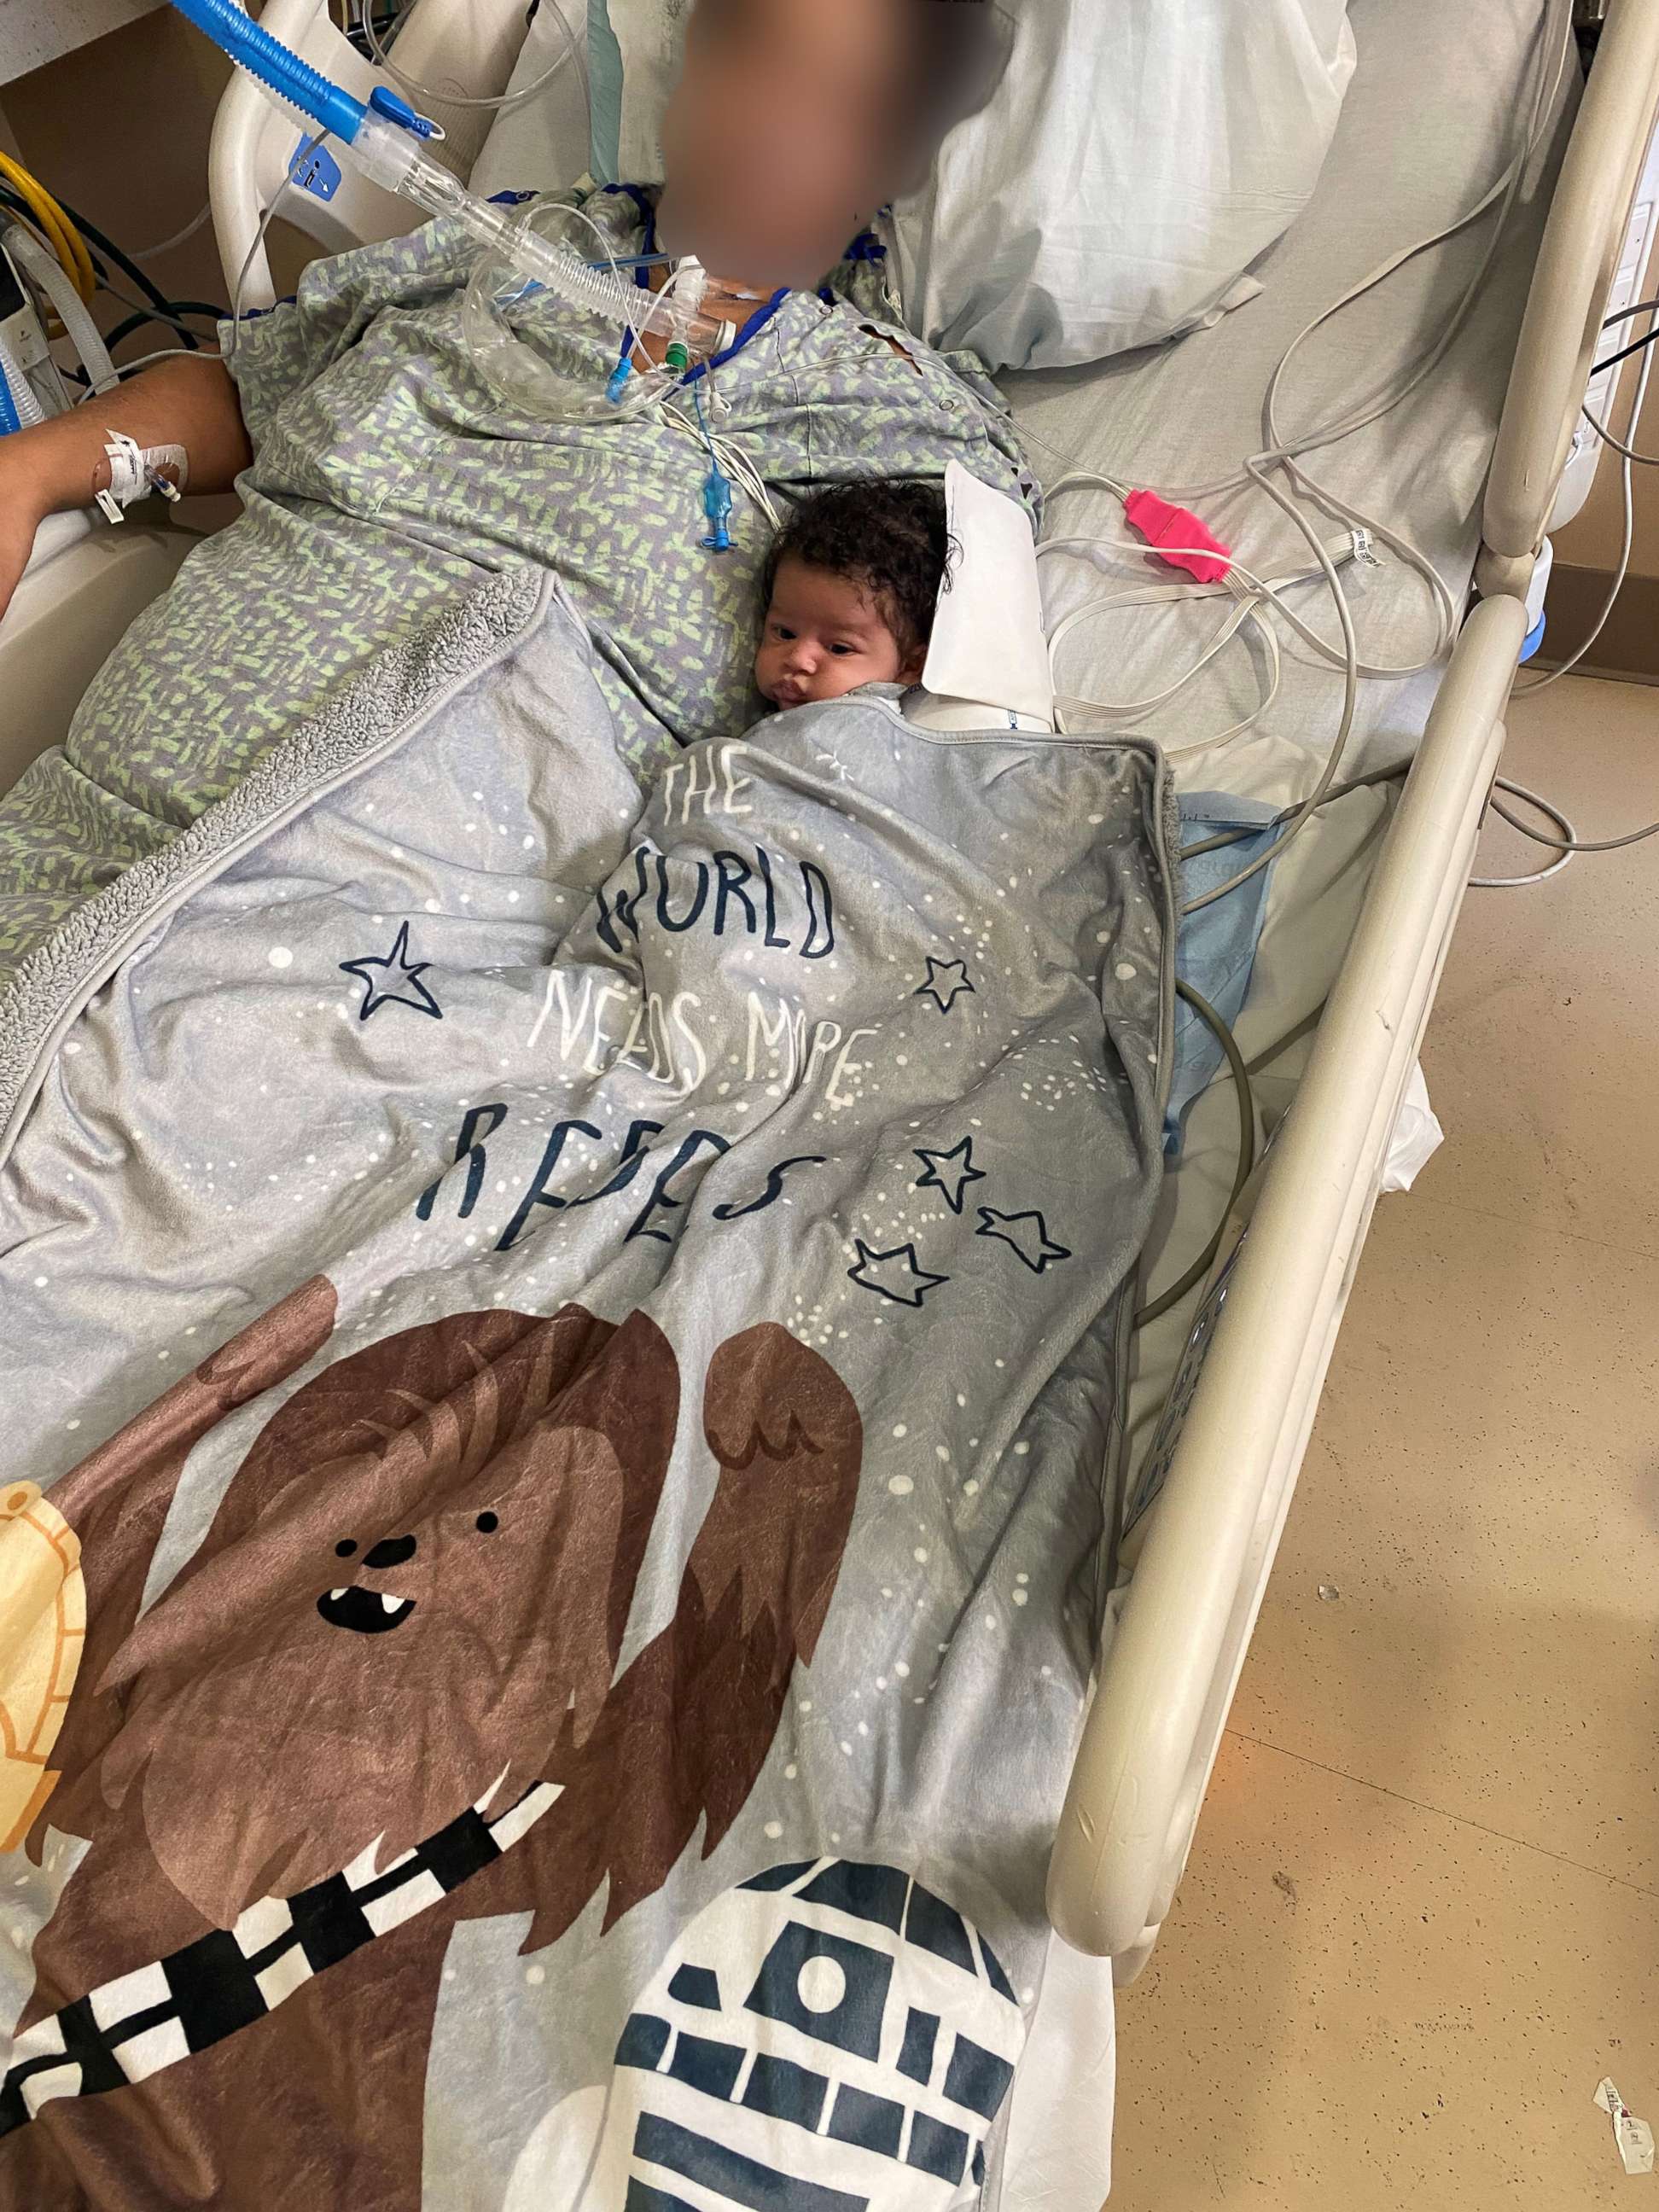 PHOTO: Cierra Chubb has been hospitalized with life-threatening COVID-19 complications since giving birth to her son, Myles, in an emergency c-section.